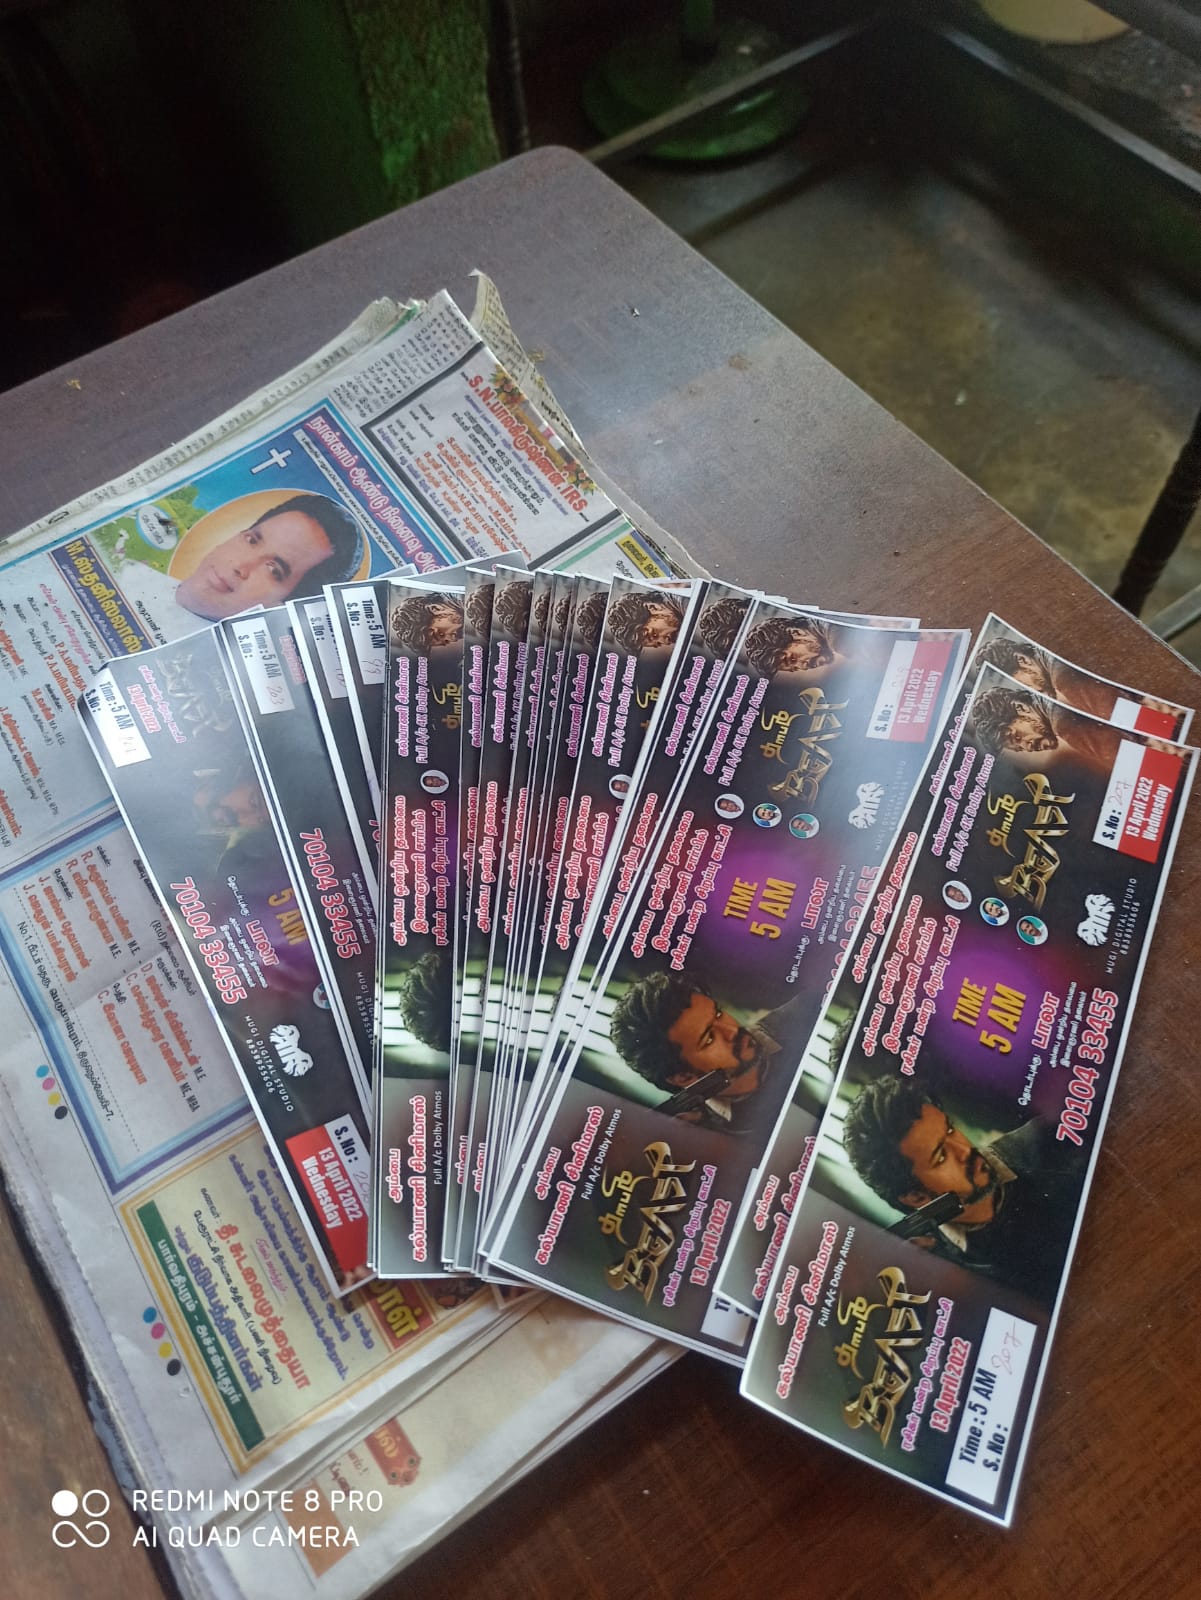 Kothu parotta free with the purchase of Vijay Beast FDFS tickets